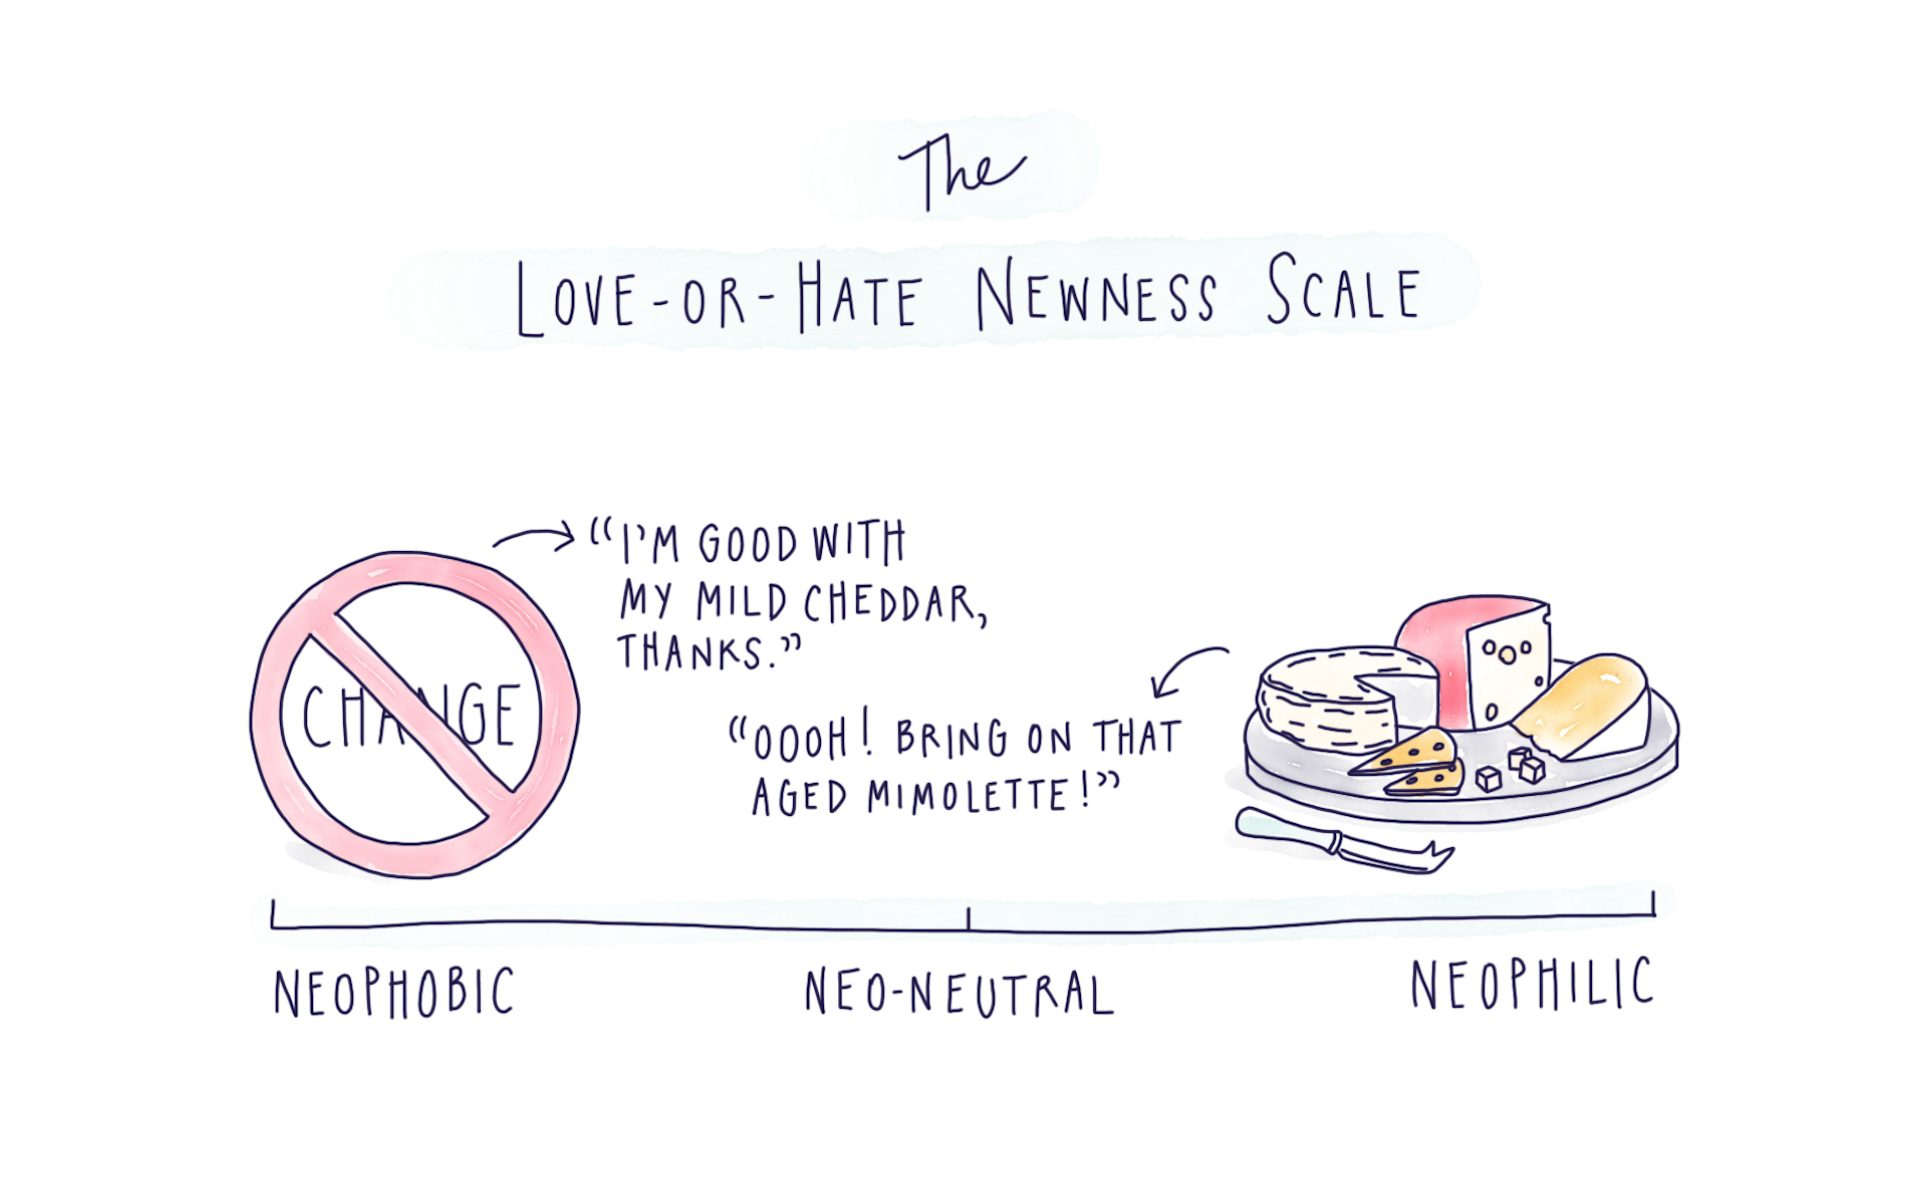 Are You a Neophiliac or a Neophobe?